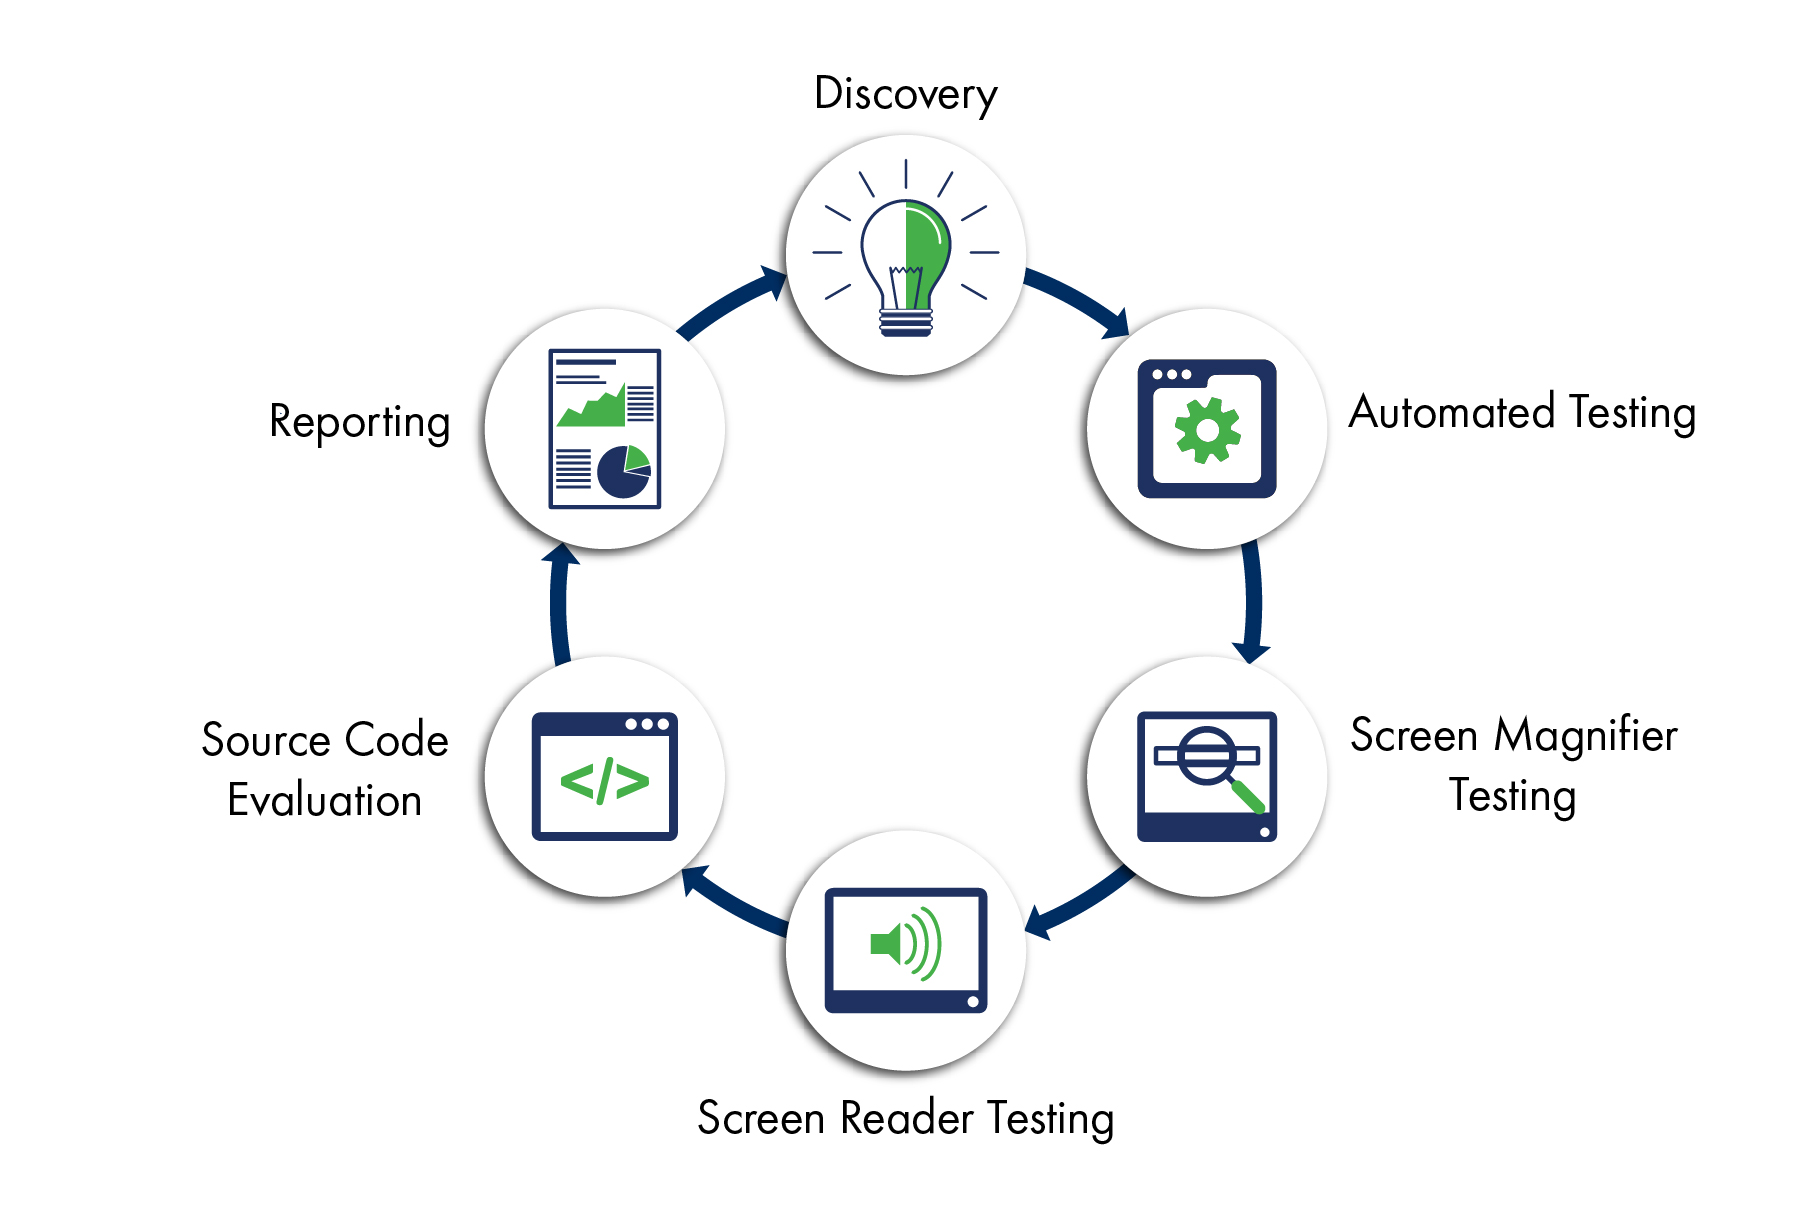 a circle flow chart showing the steps of our process - 1. discovery, 2. automated testing, 3. screen magnifier testing, 4. screen reader testing, 5. source code evaluation, 6. reporting